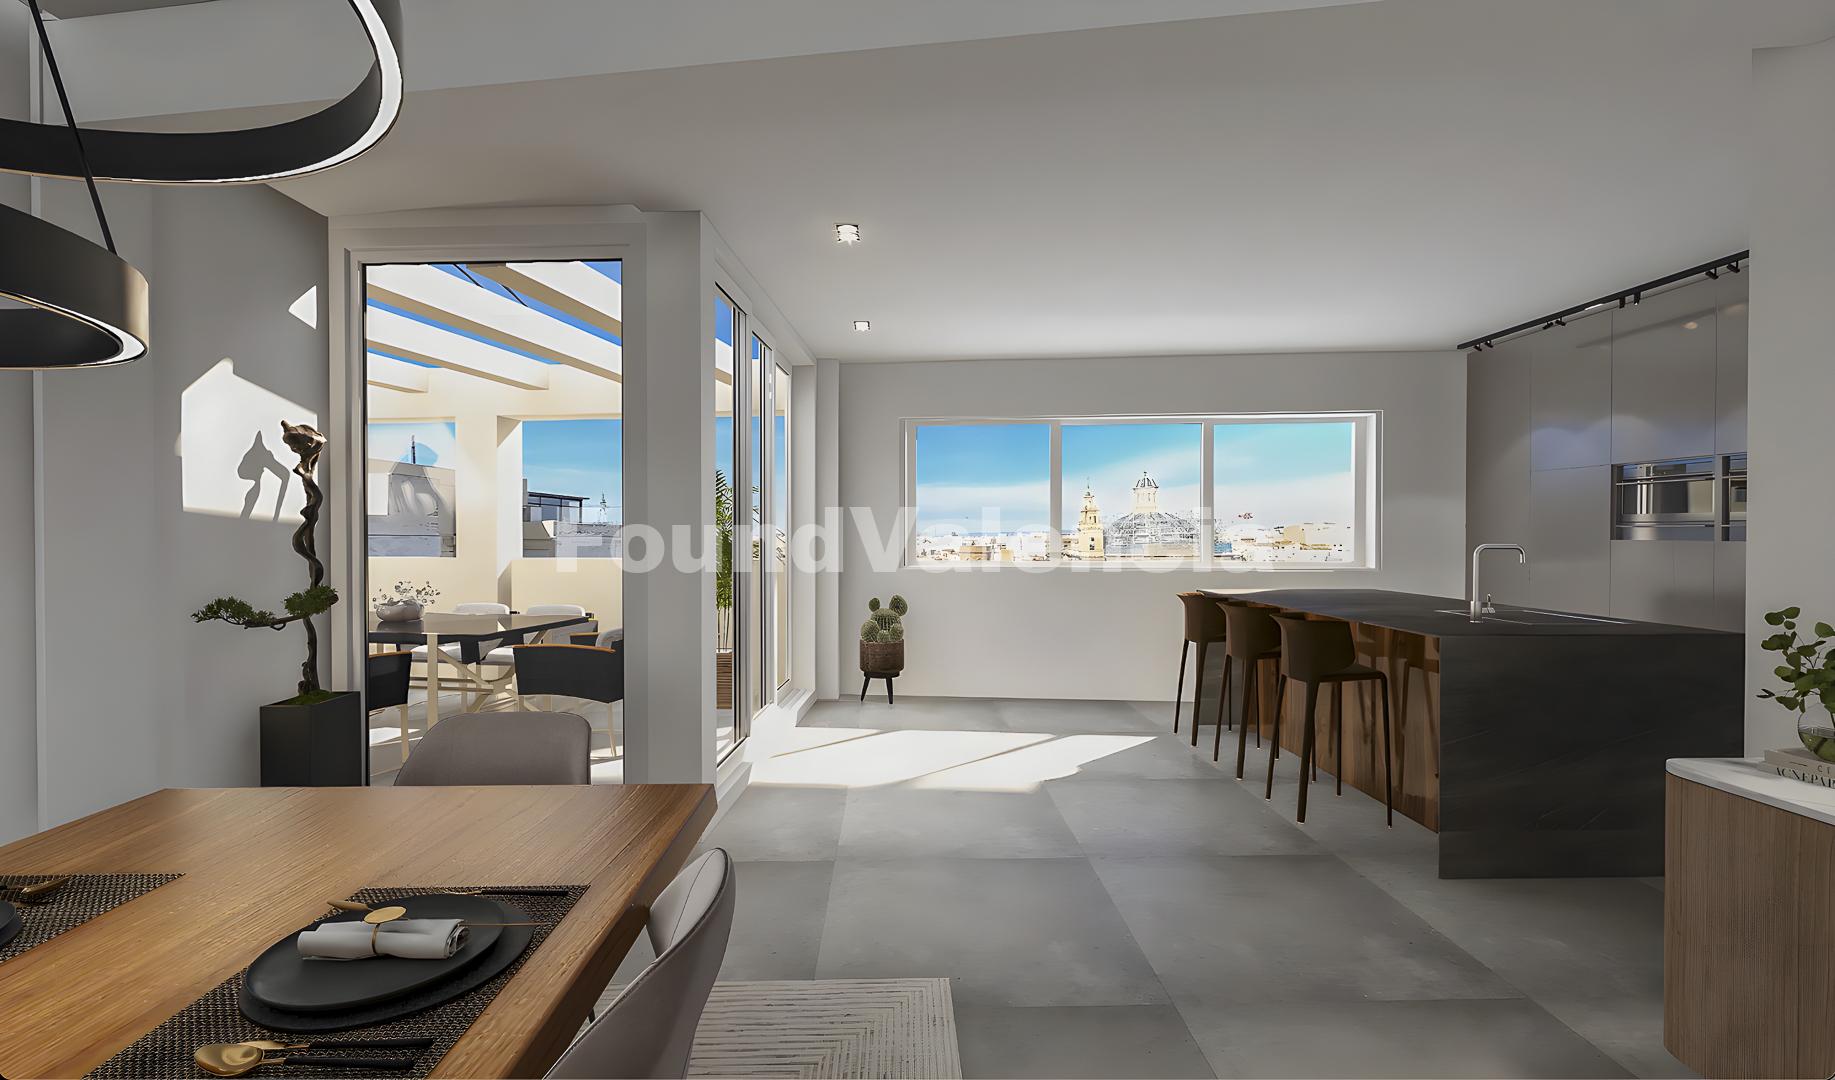 Exclusive Penthouse Fully Renovated With Incredible Views The City Of Valencia